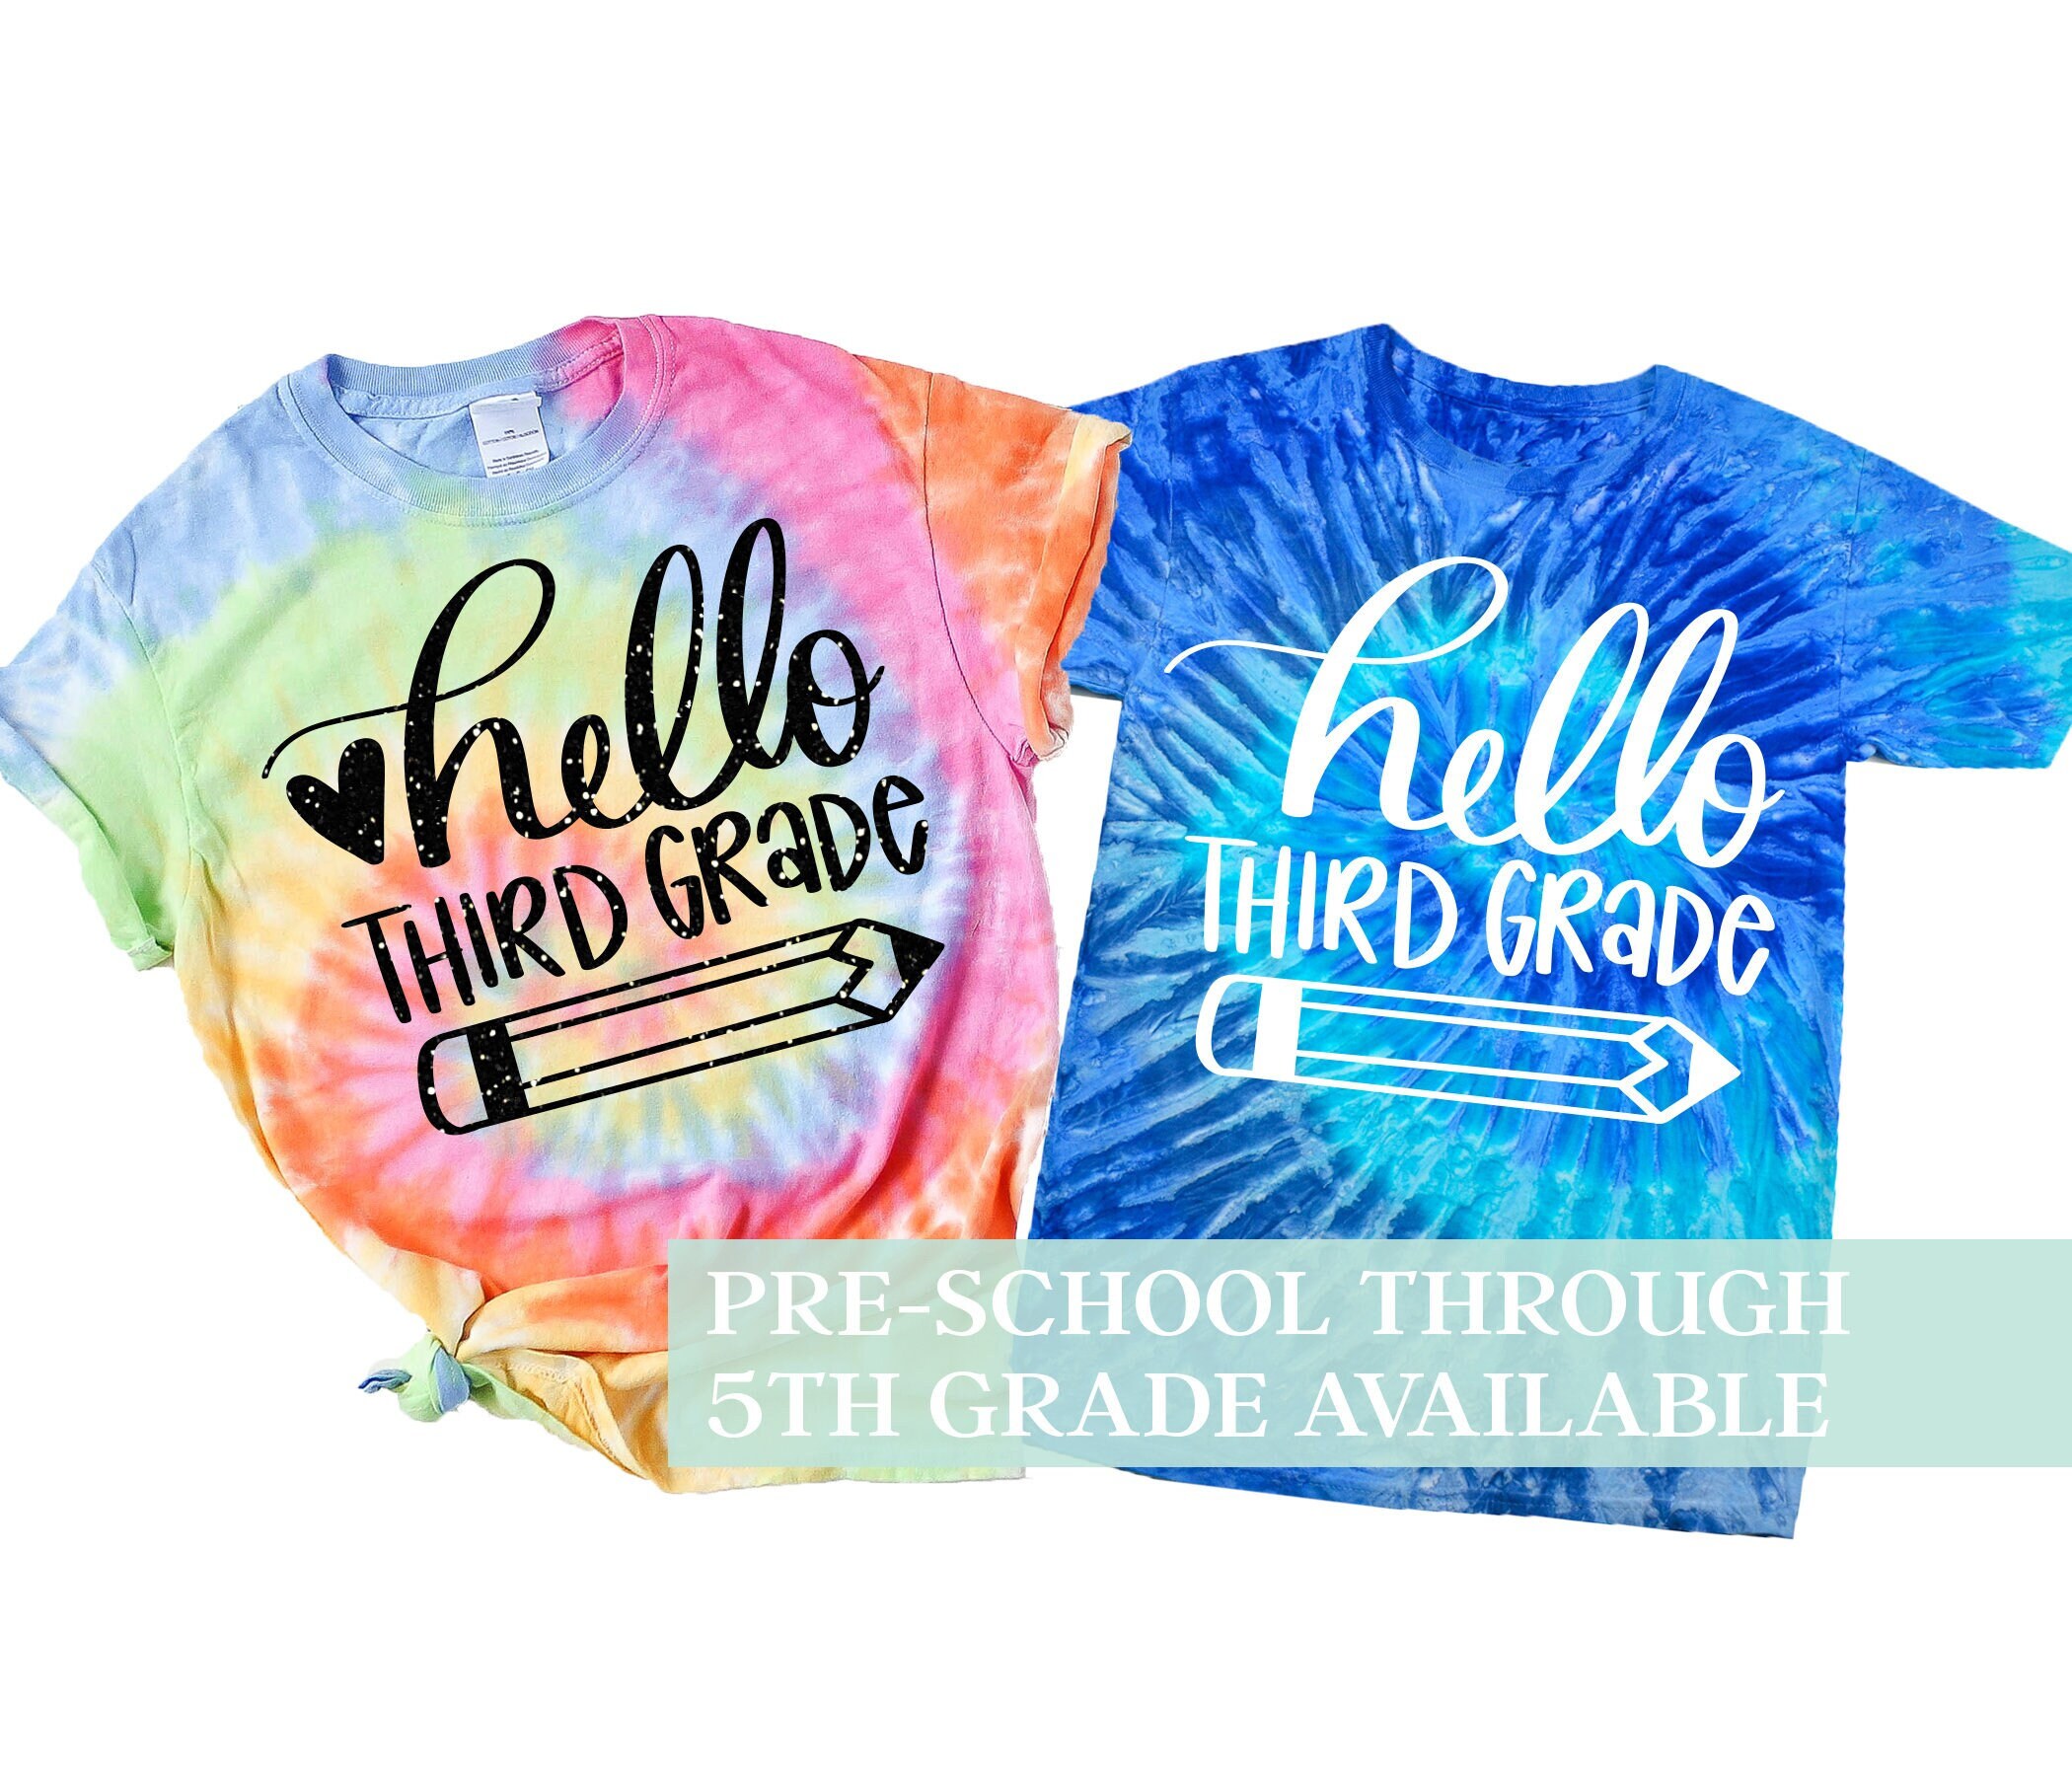 Hello Fourth Grade Shirt, First Day of School Shirt, 4th Grade Shirt, Back  to School Shirt, Fourth Grade Shirt, Tie-dye Shirt, School Shirt - Etsy